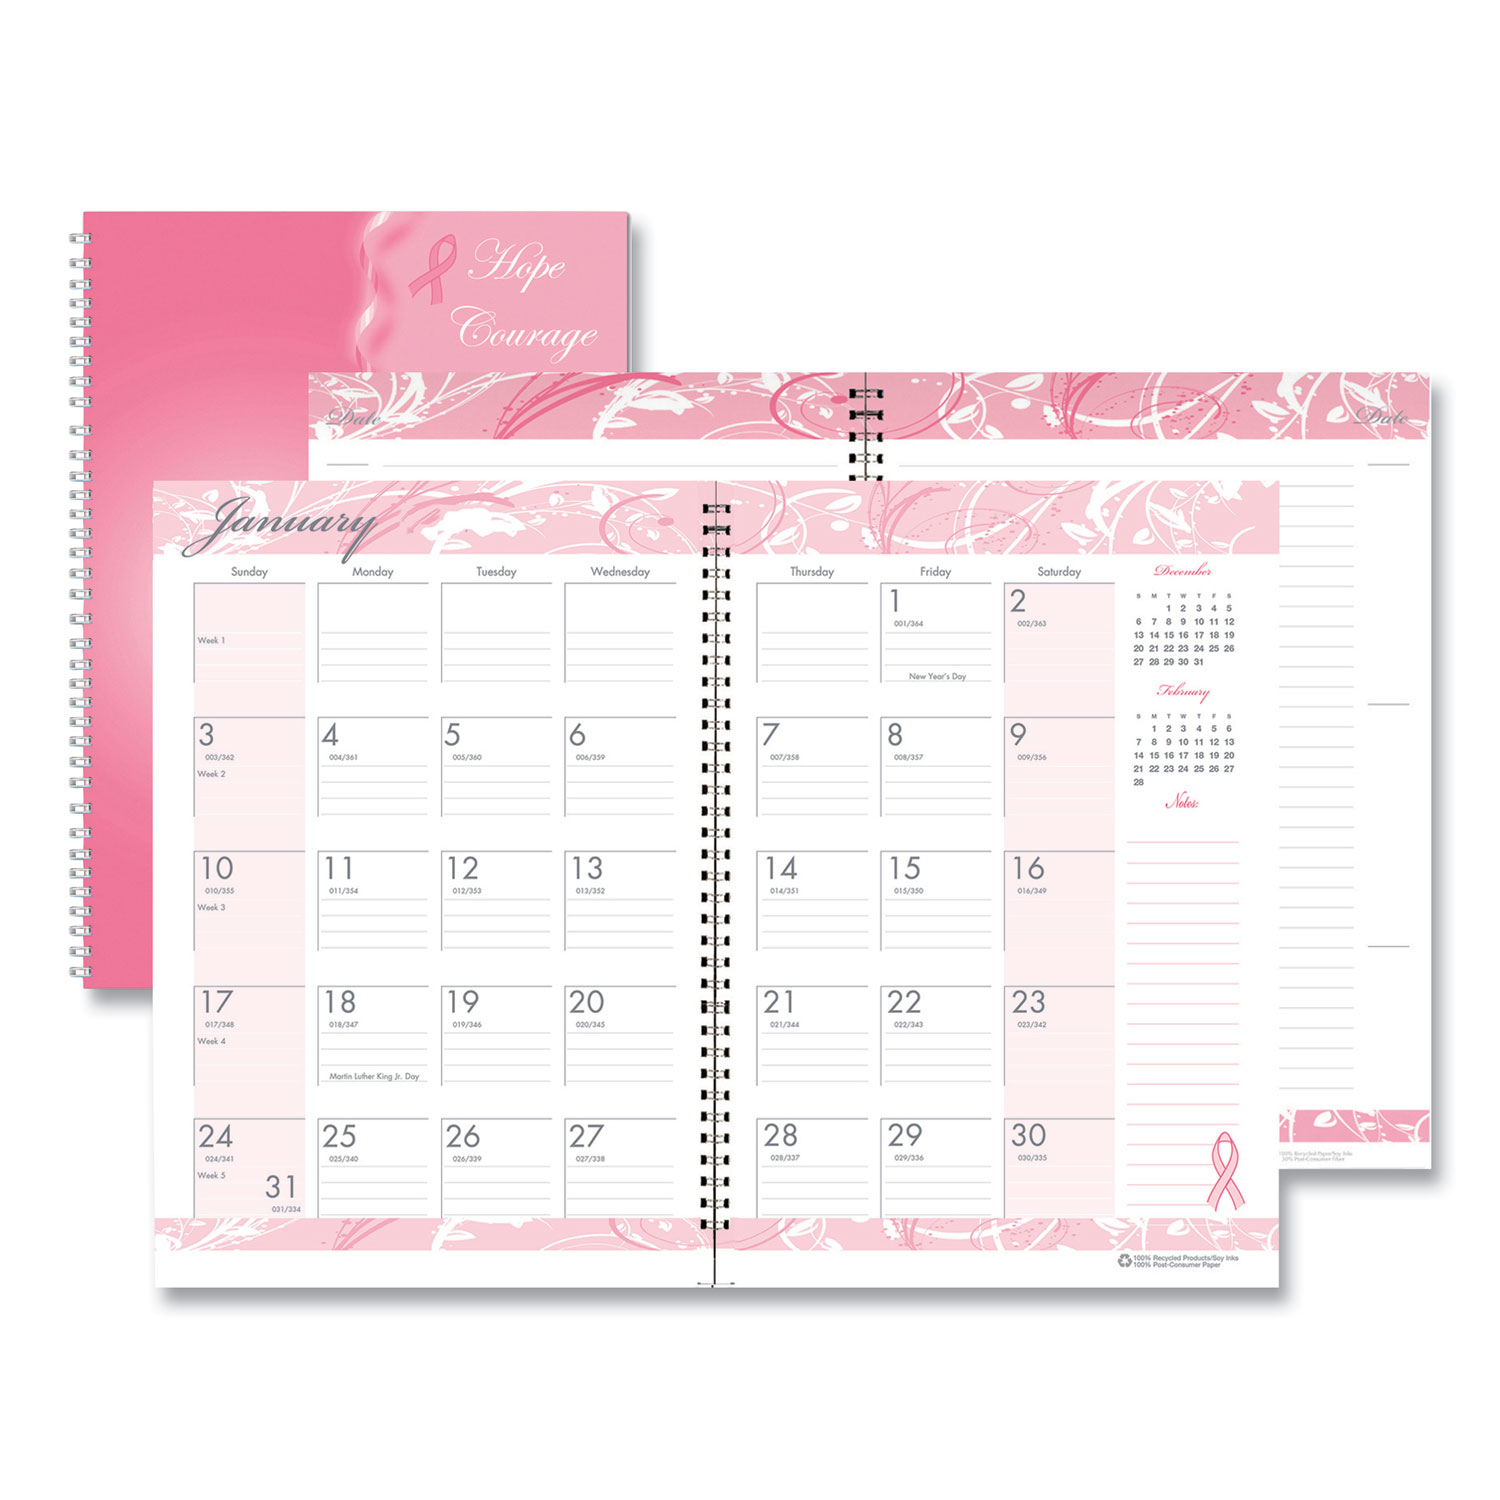  House of Doolittle 5226 Recycled Breast Cancer Awareness Monthly Planner/Journal, 10 x 7, Pink, 2020 (HOD5226) 